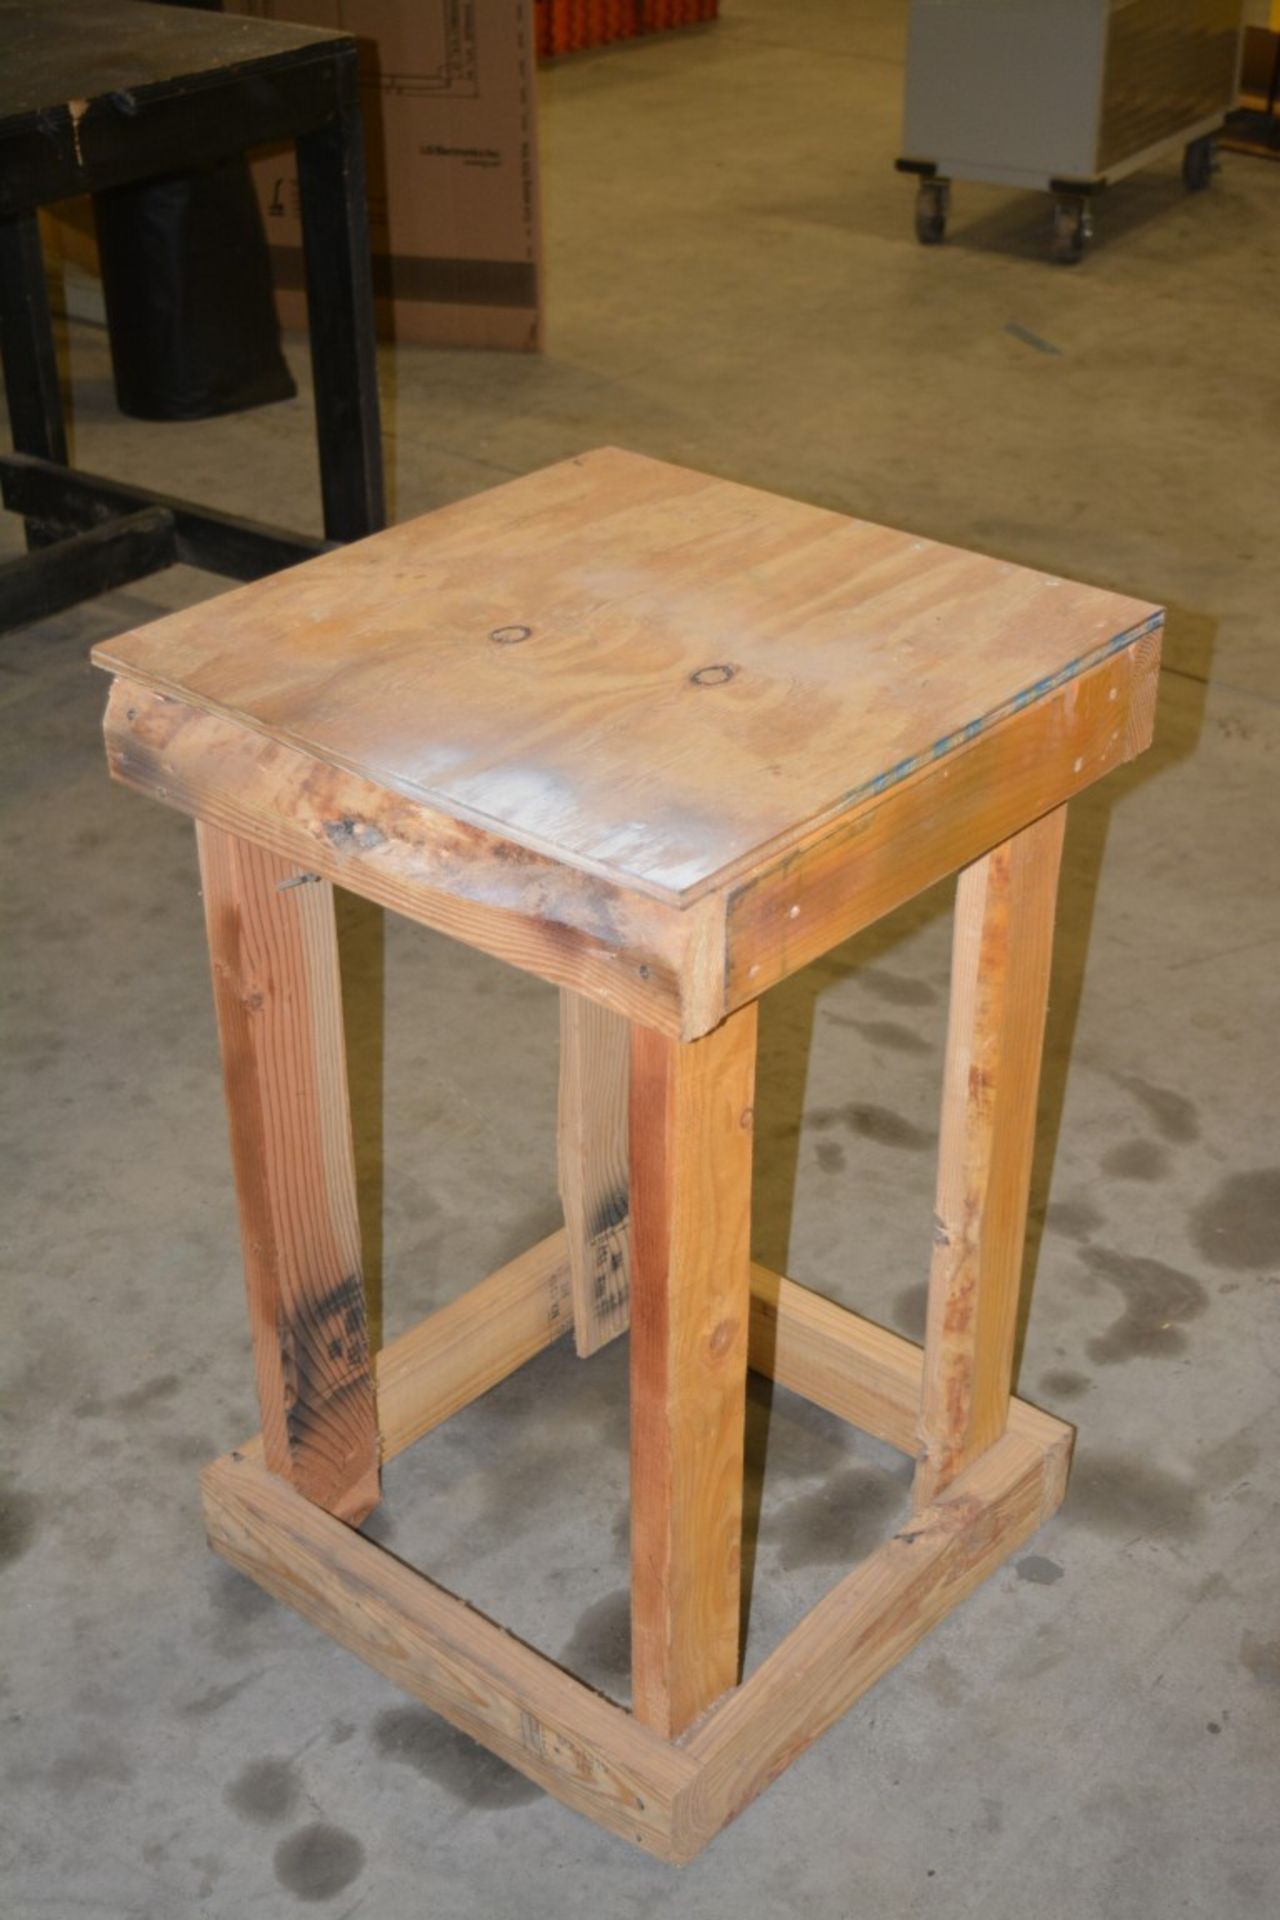 SMALL WOODEN WOEK TABLE - Image 2 of 2